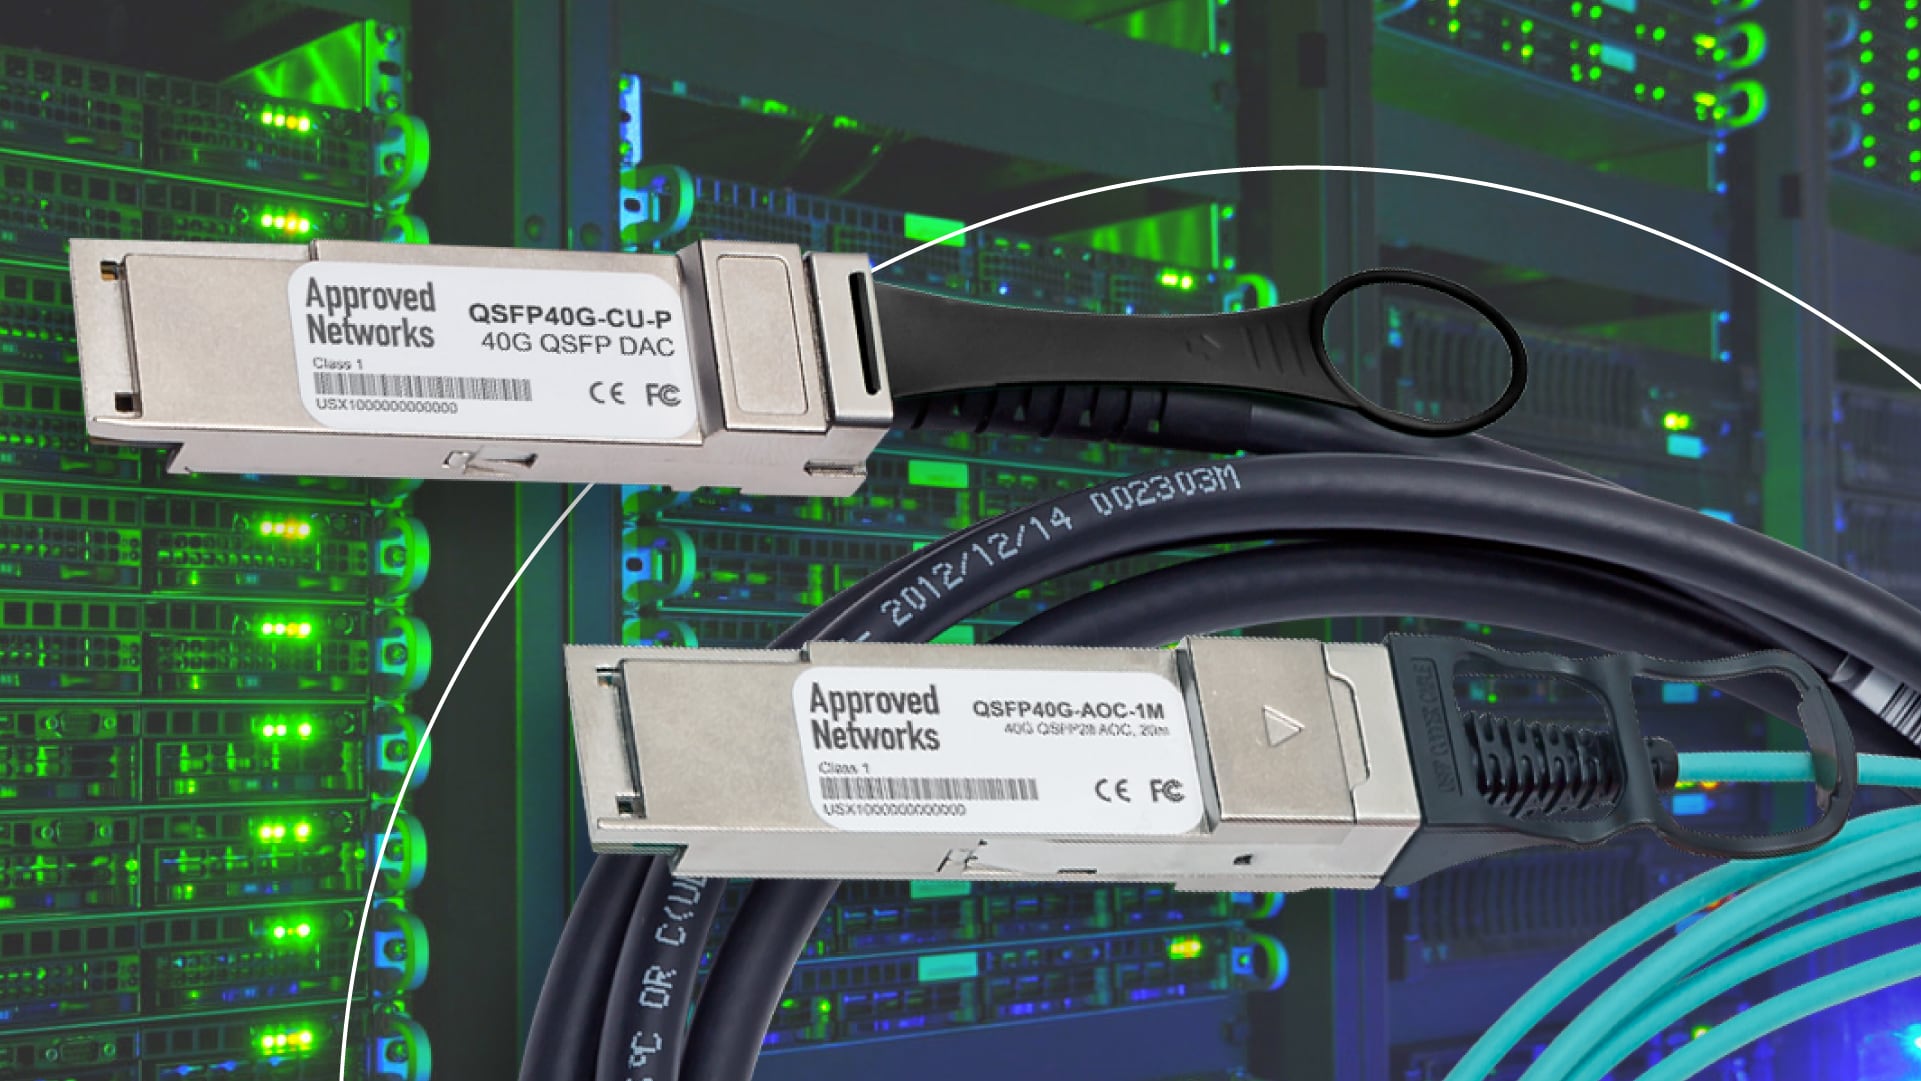 A pair of Approved Networks QSFP40G-CU-P DACs transceiver fiber optic cables.